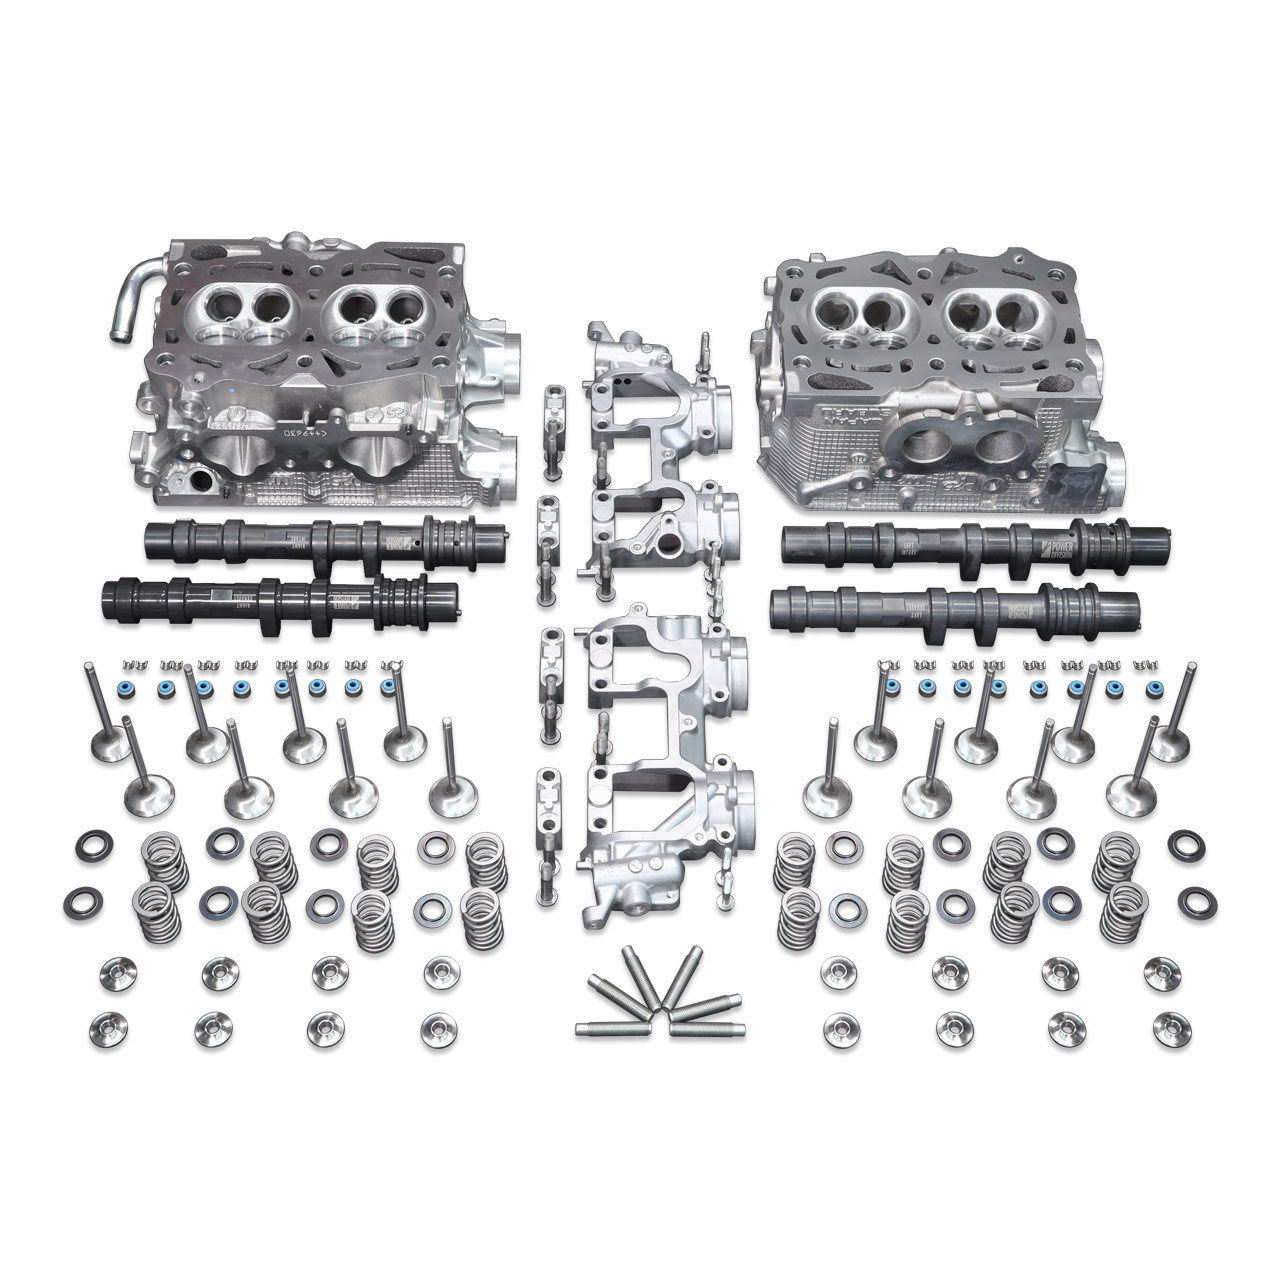 IAG 750 CNC Pocket Ported Competition Cylinder Heads Package for 02-14 WRX, 04-21 STI, 05-09 LGT, 04-13 FXT